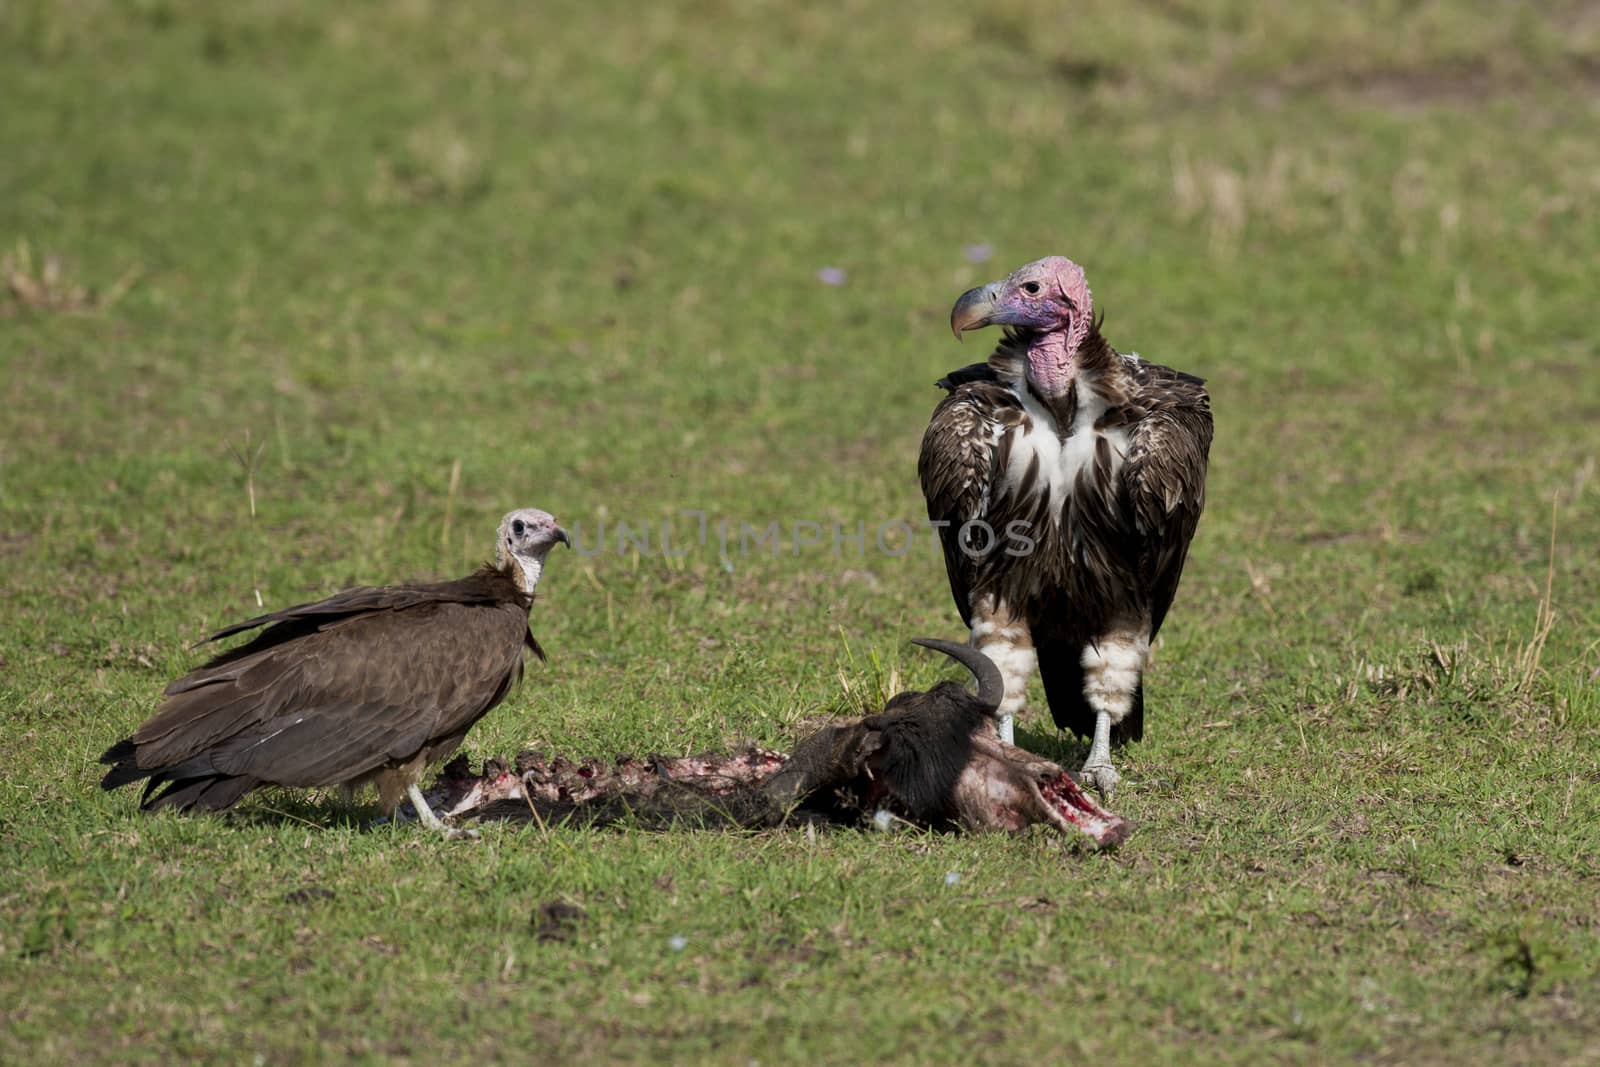 Two lappet-faced vultures in Masai Mara National Park of Kenya